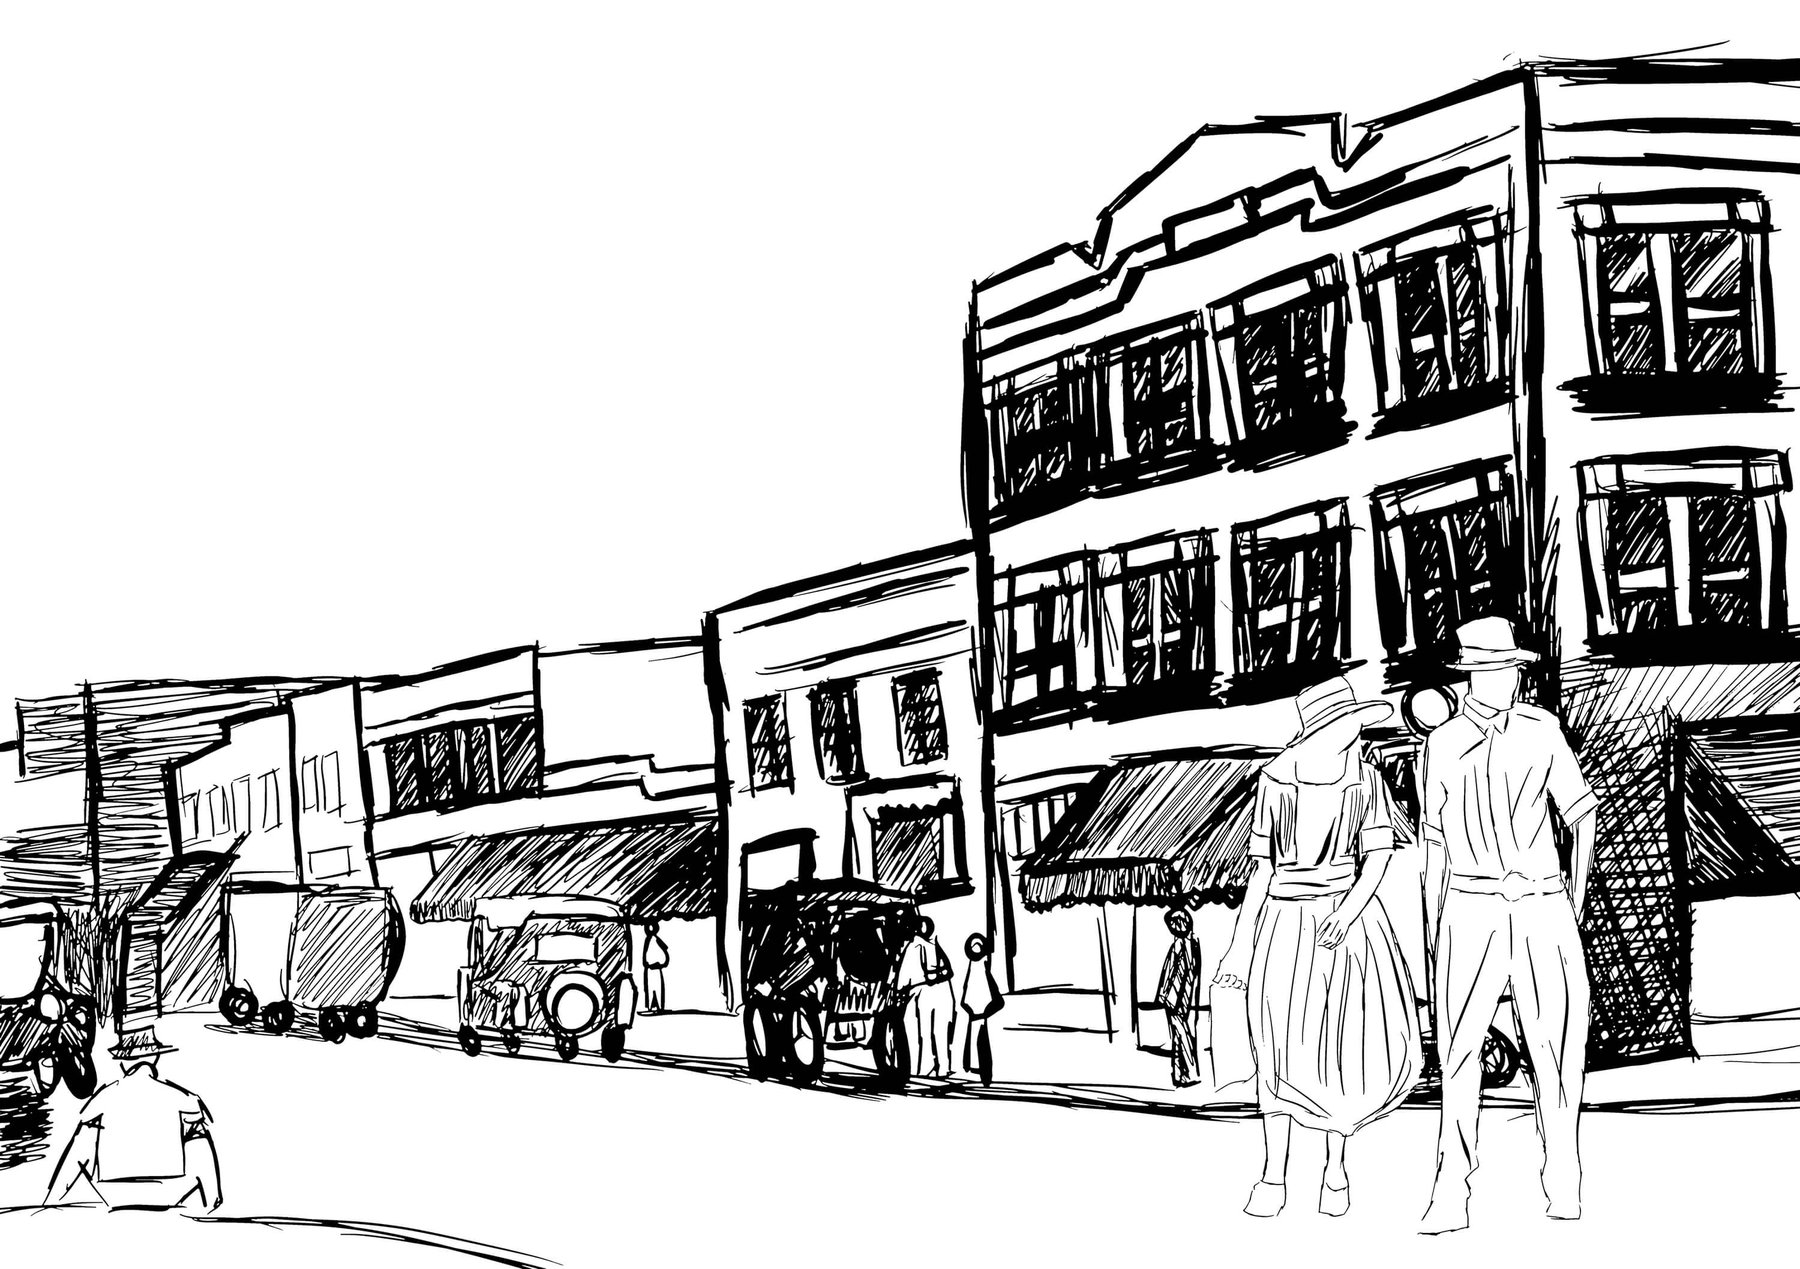 illustration of a street with people and buildings.jpg